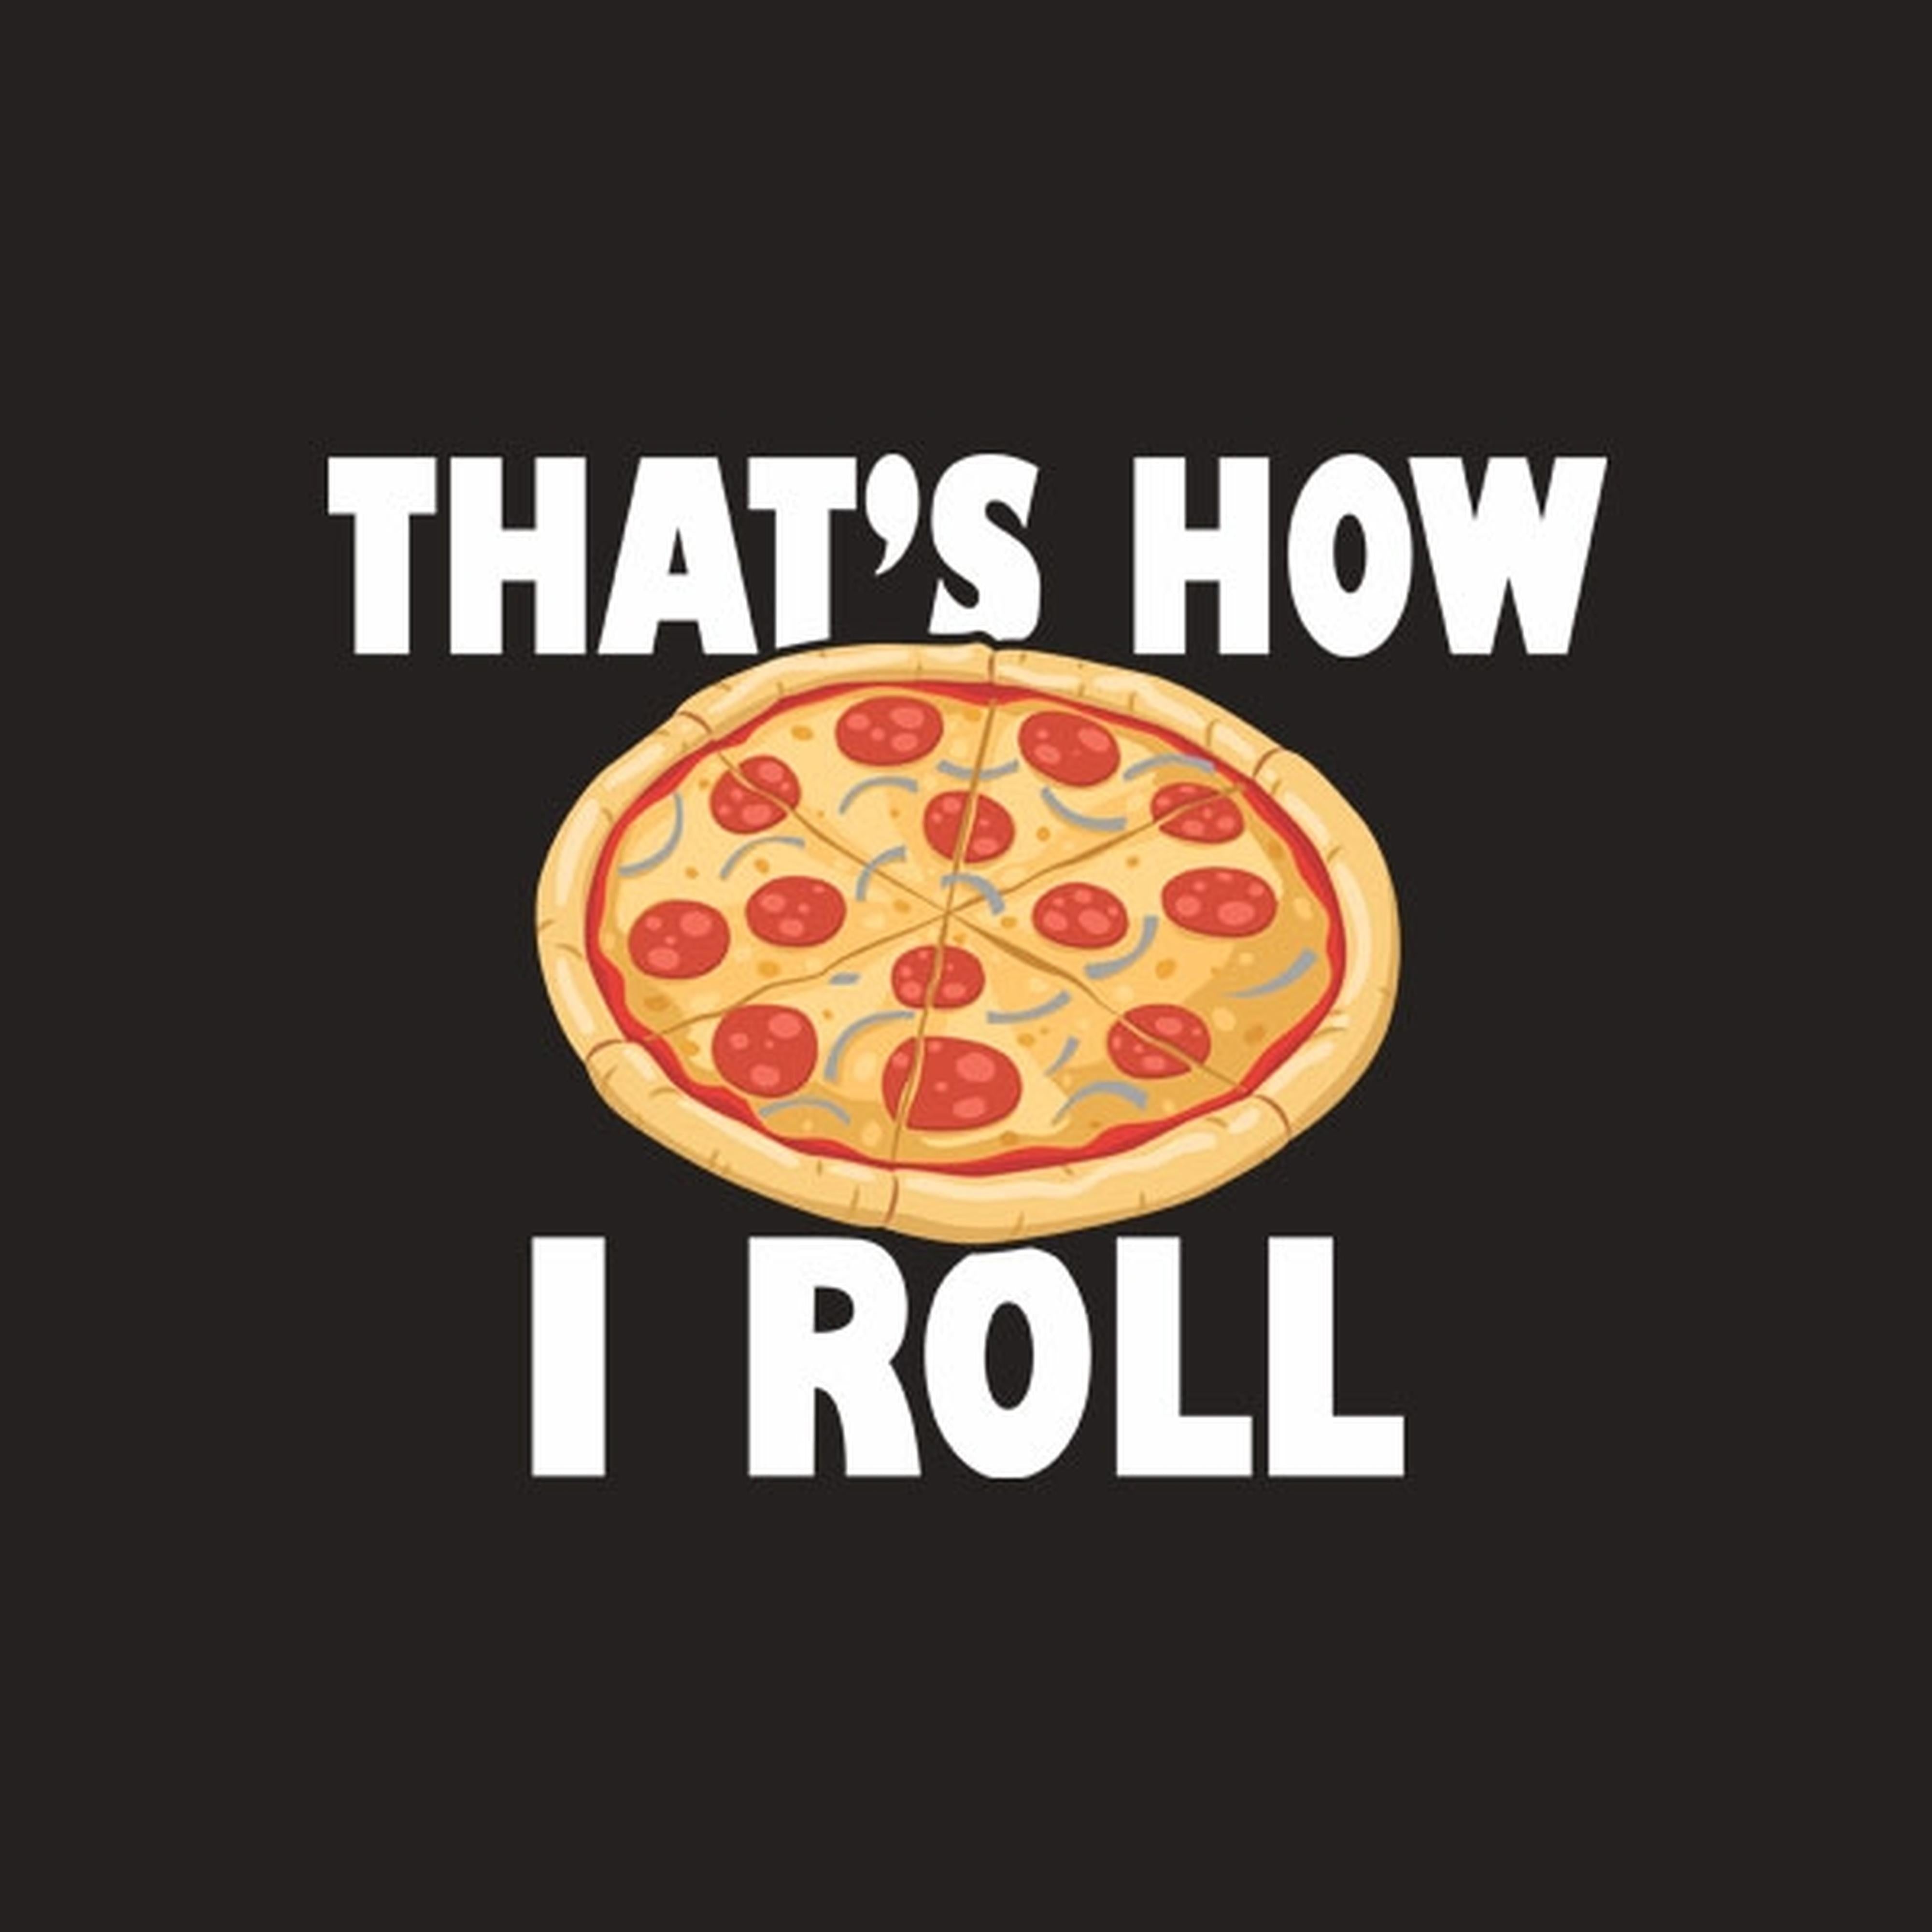 That's how I roll (pizza) - T-shirt